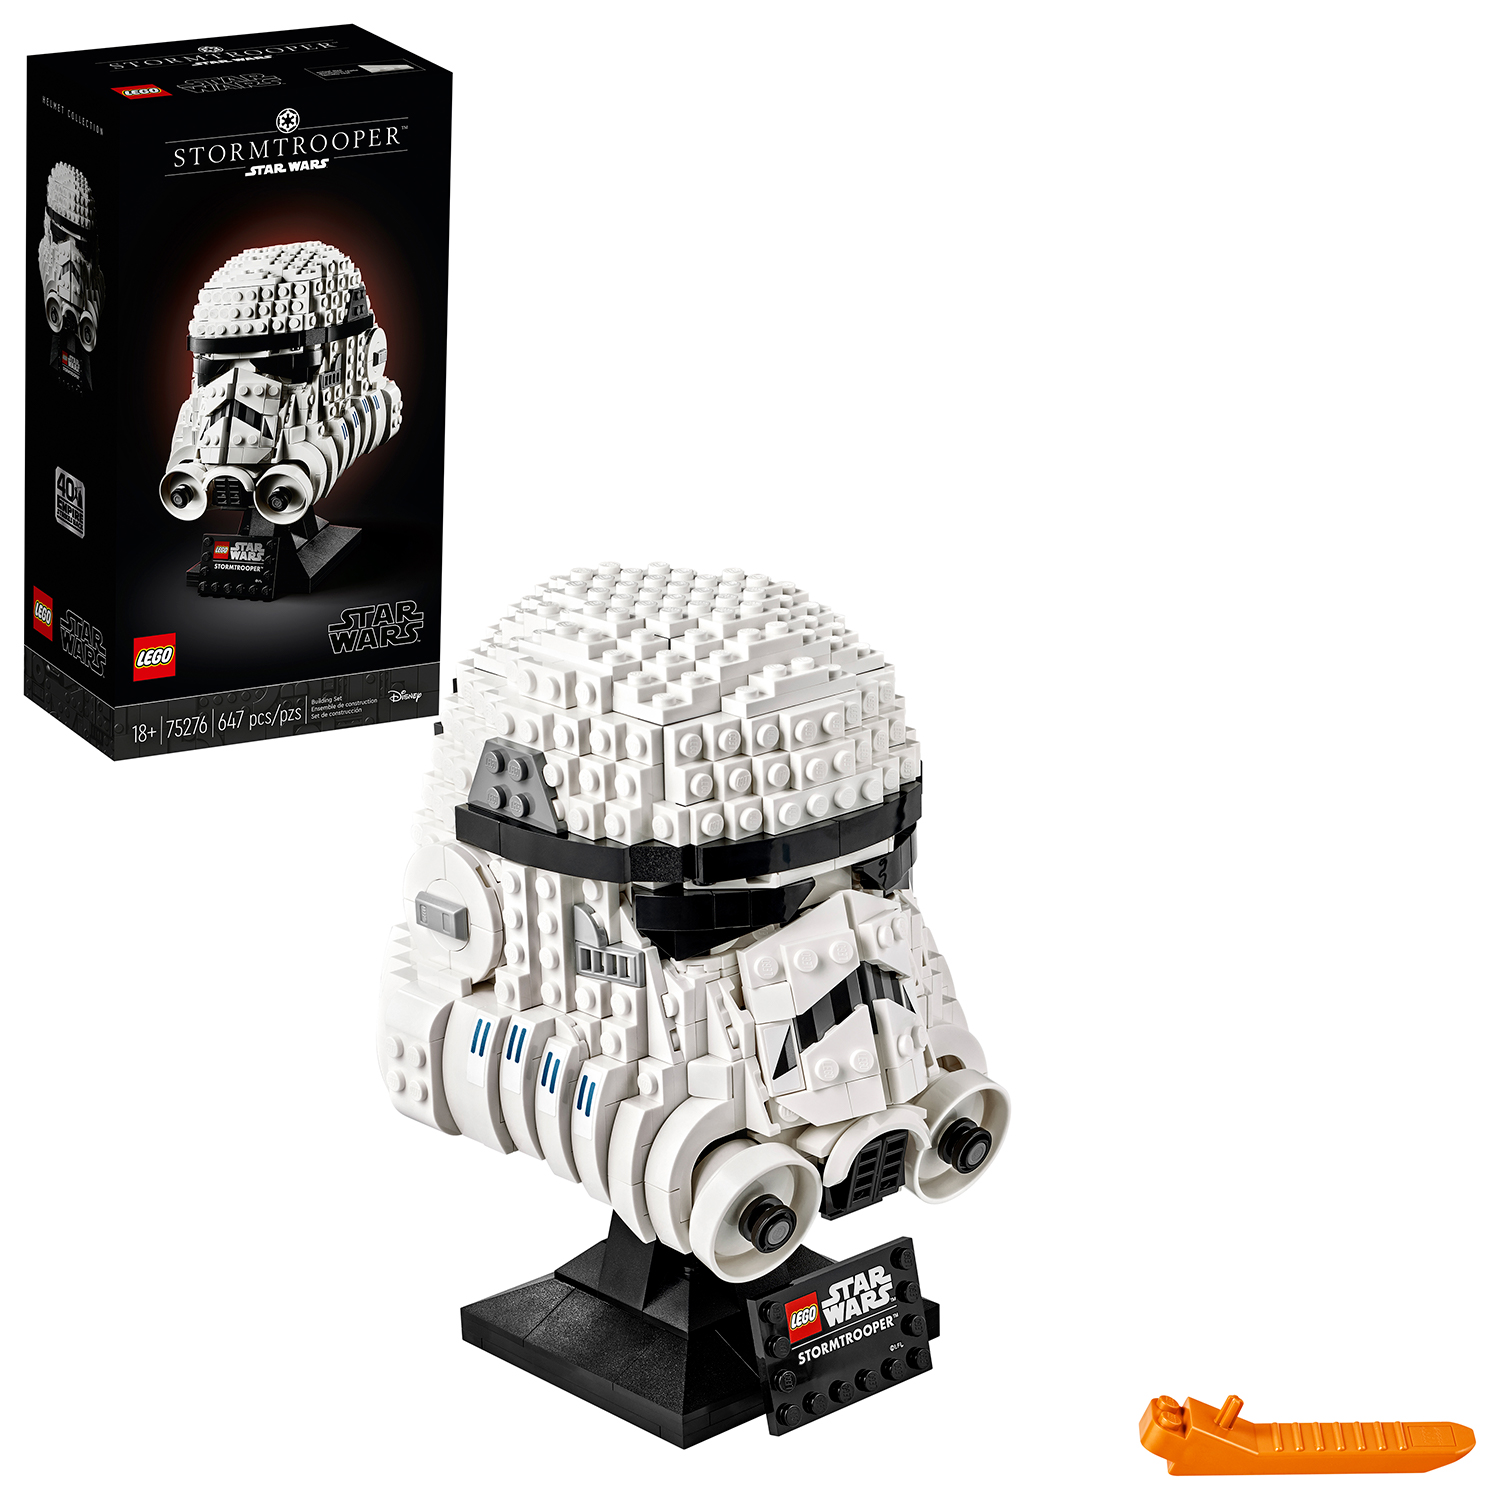 LEGO Star Wars Stormtrooper Helmet 75276 Building Kit, Cool Star Wars Collectible for Adults (647 Pieces) - image 1 of 8